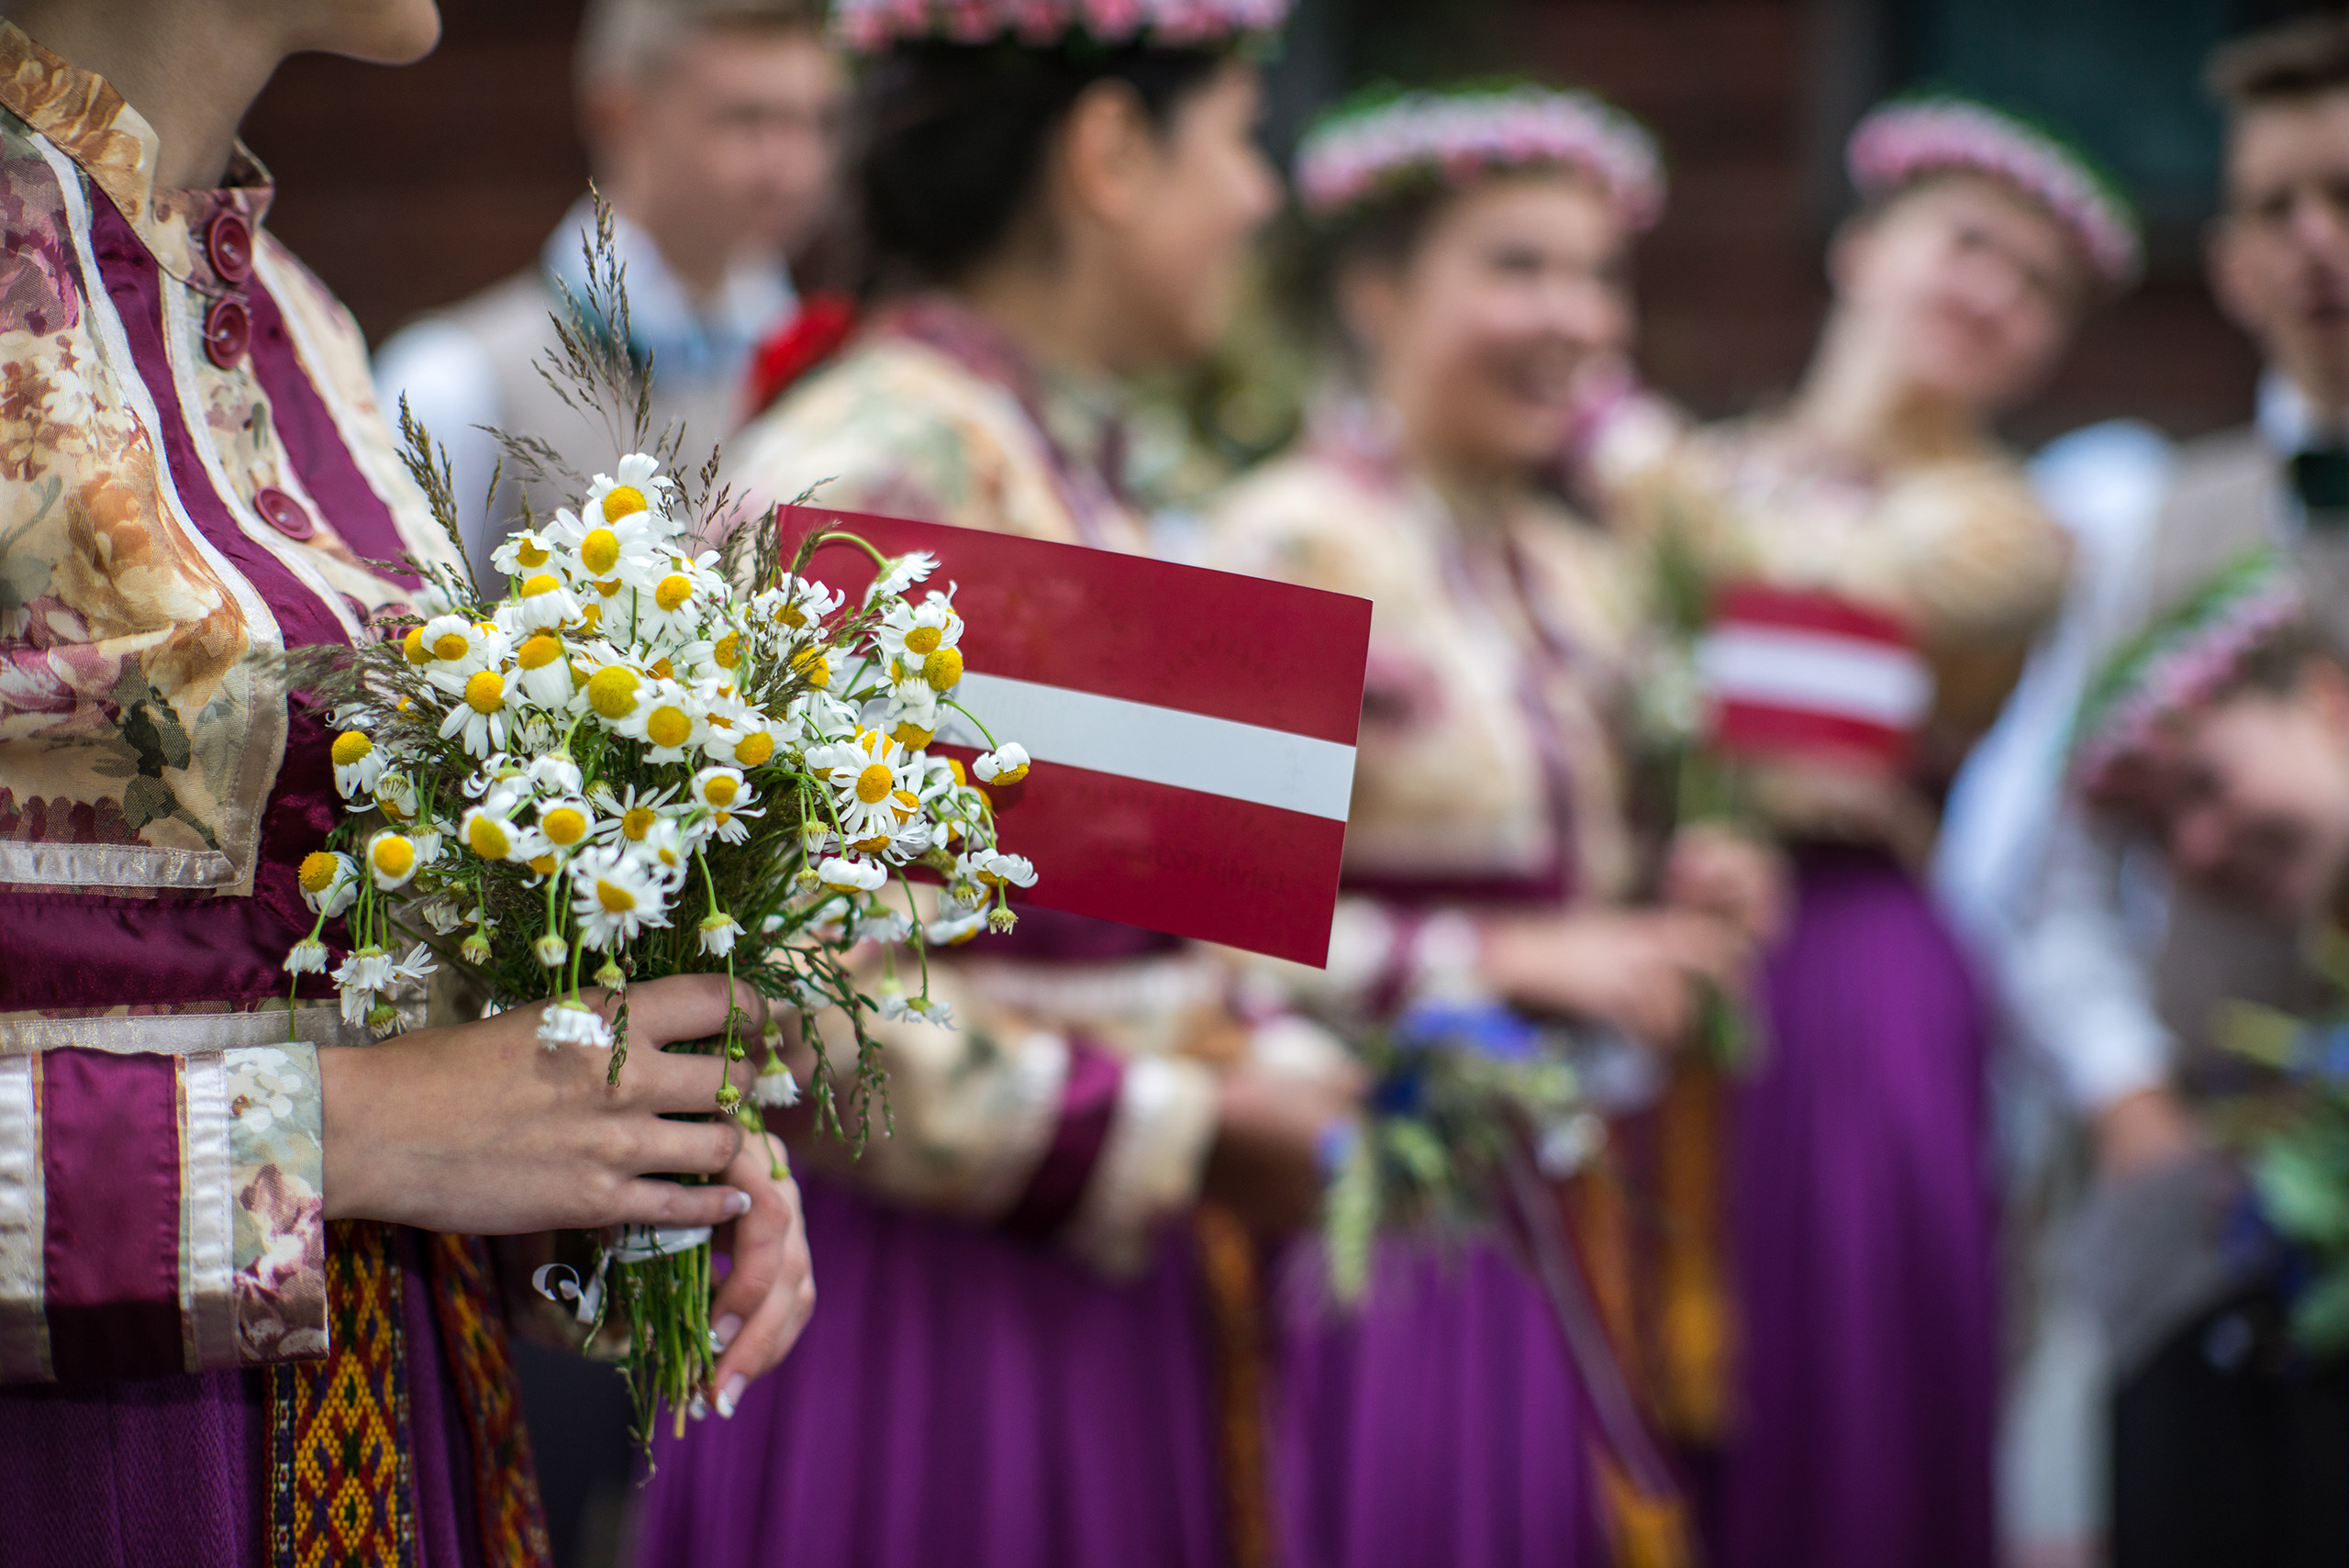 Elements of ornaments and flowers. Song and dance festival in Latvia. Procession in Riga. Latvia 100 years.